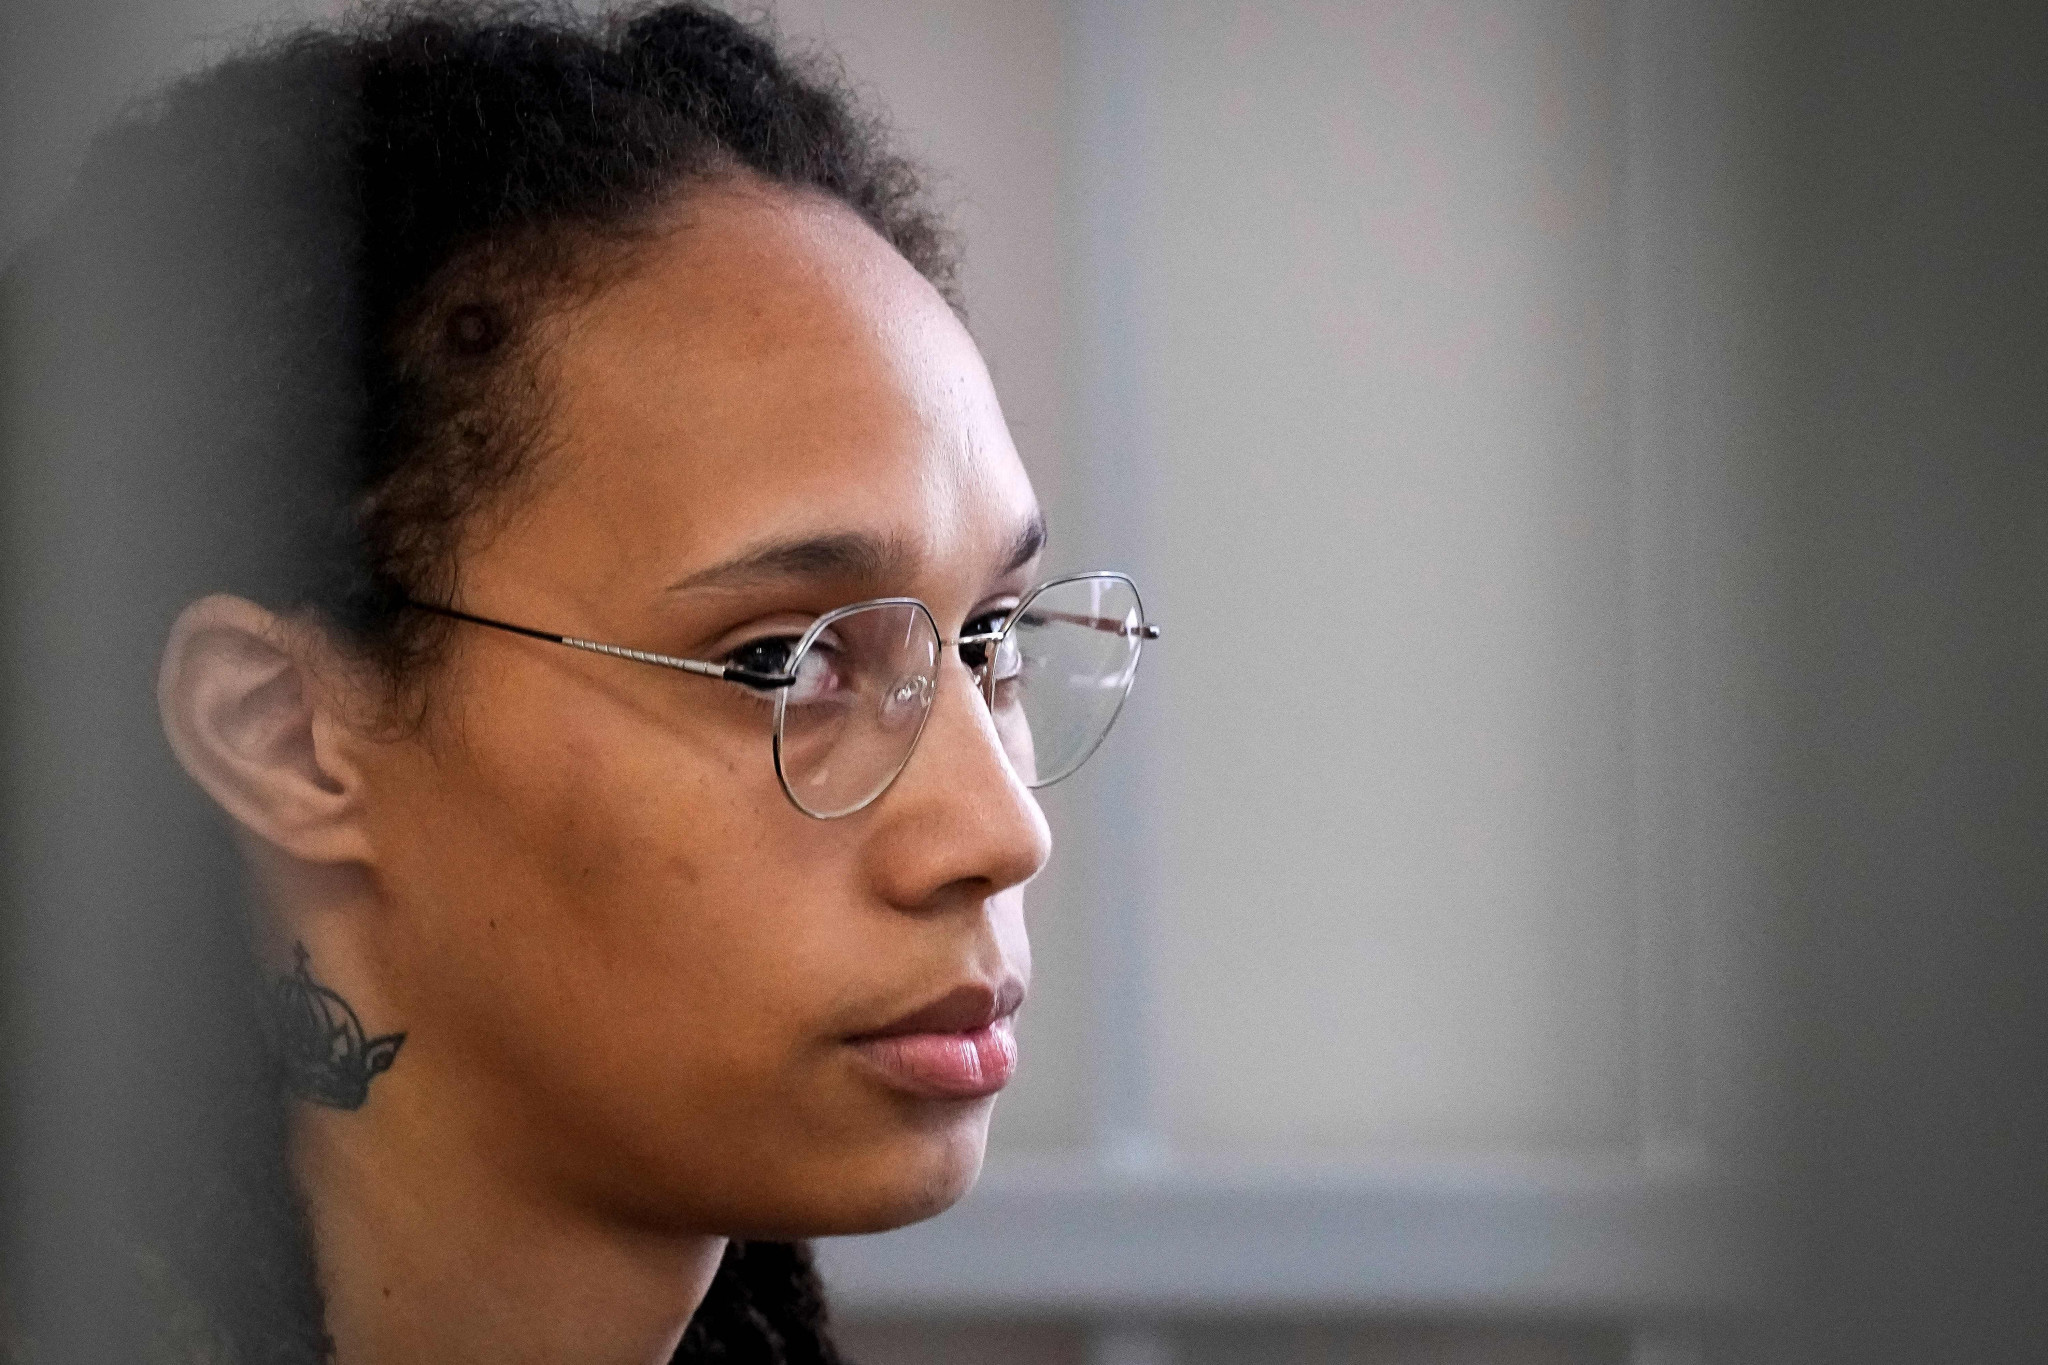 Griner launches appeal against nine-year prison sentence